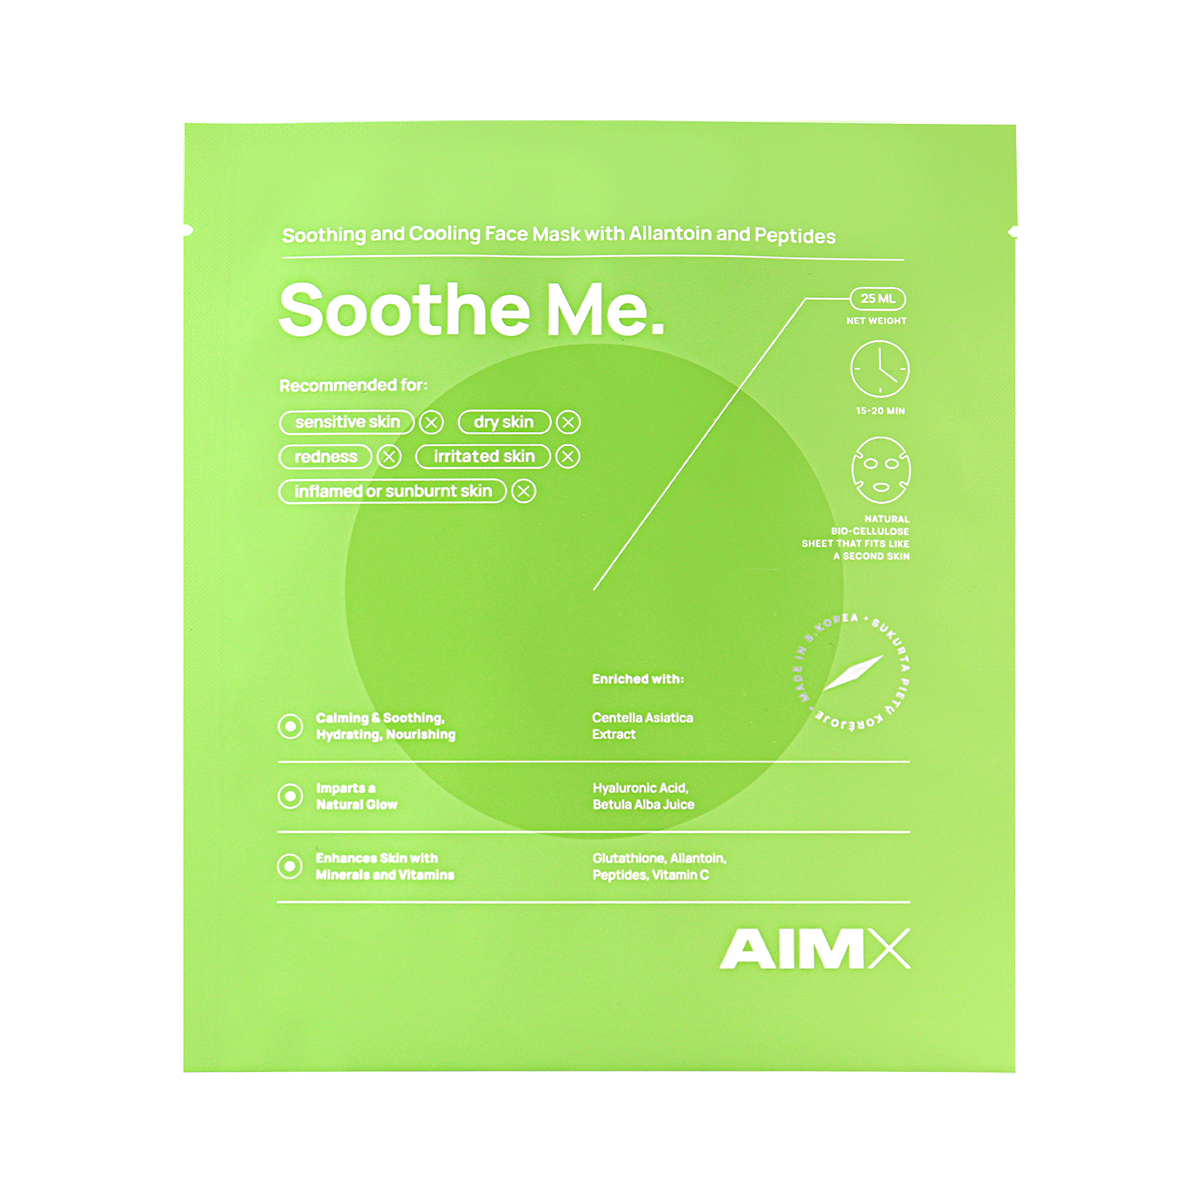 AIMX Soothe Me Soothing face mask with Peptides 25ml